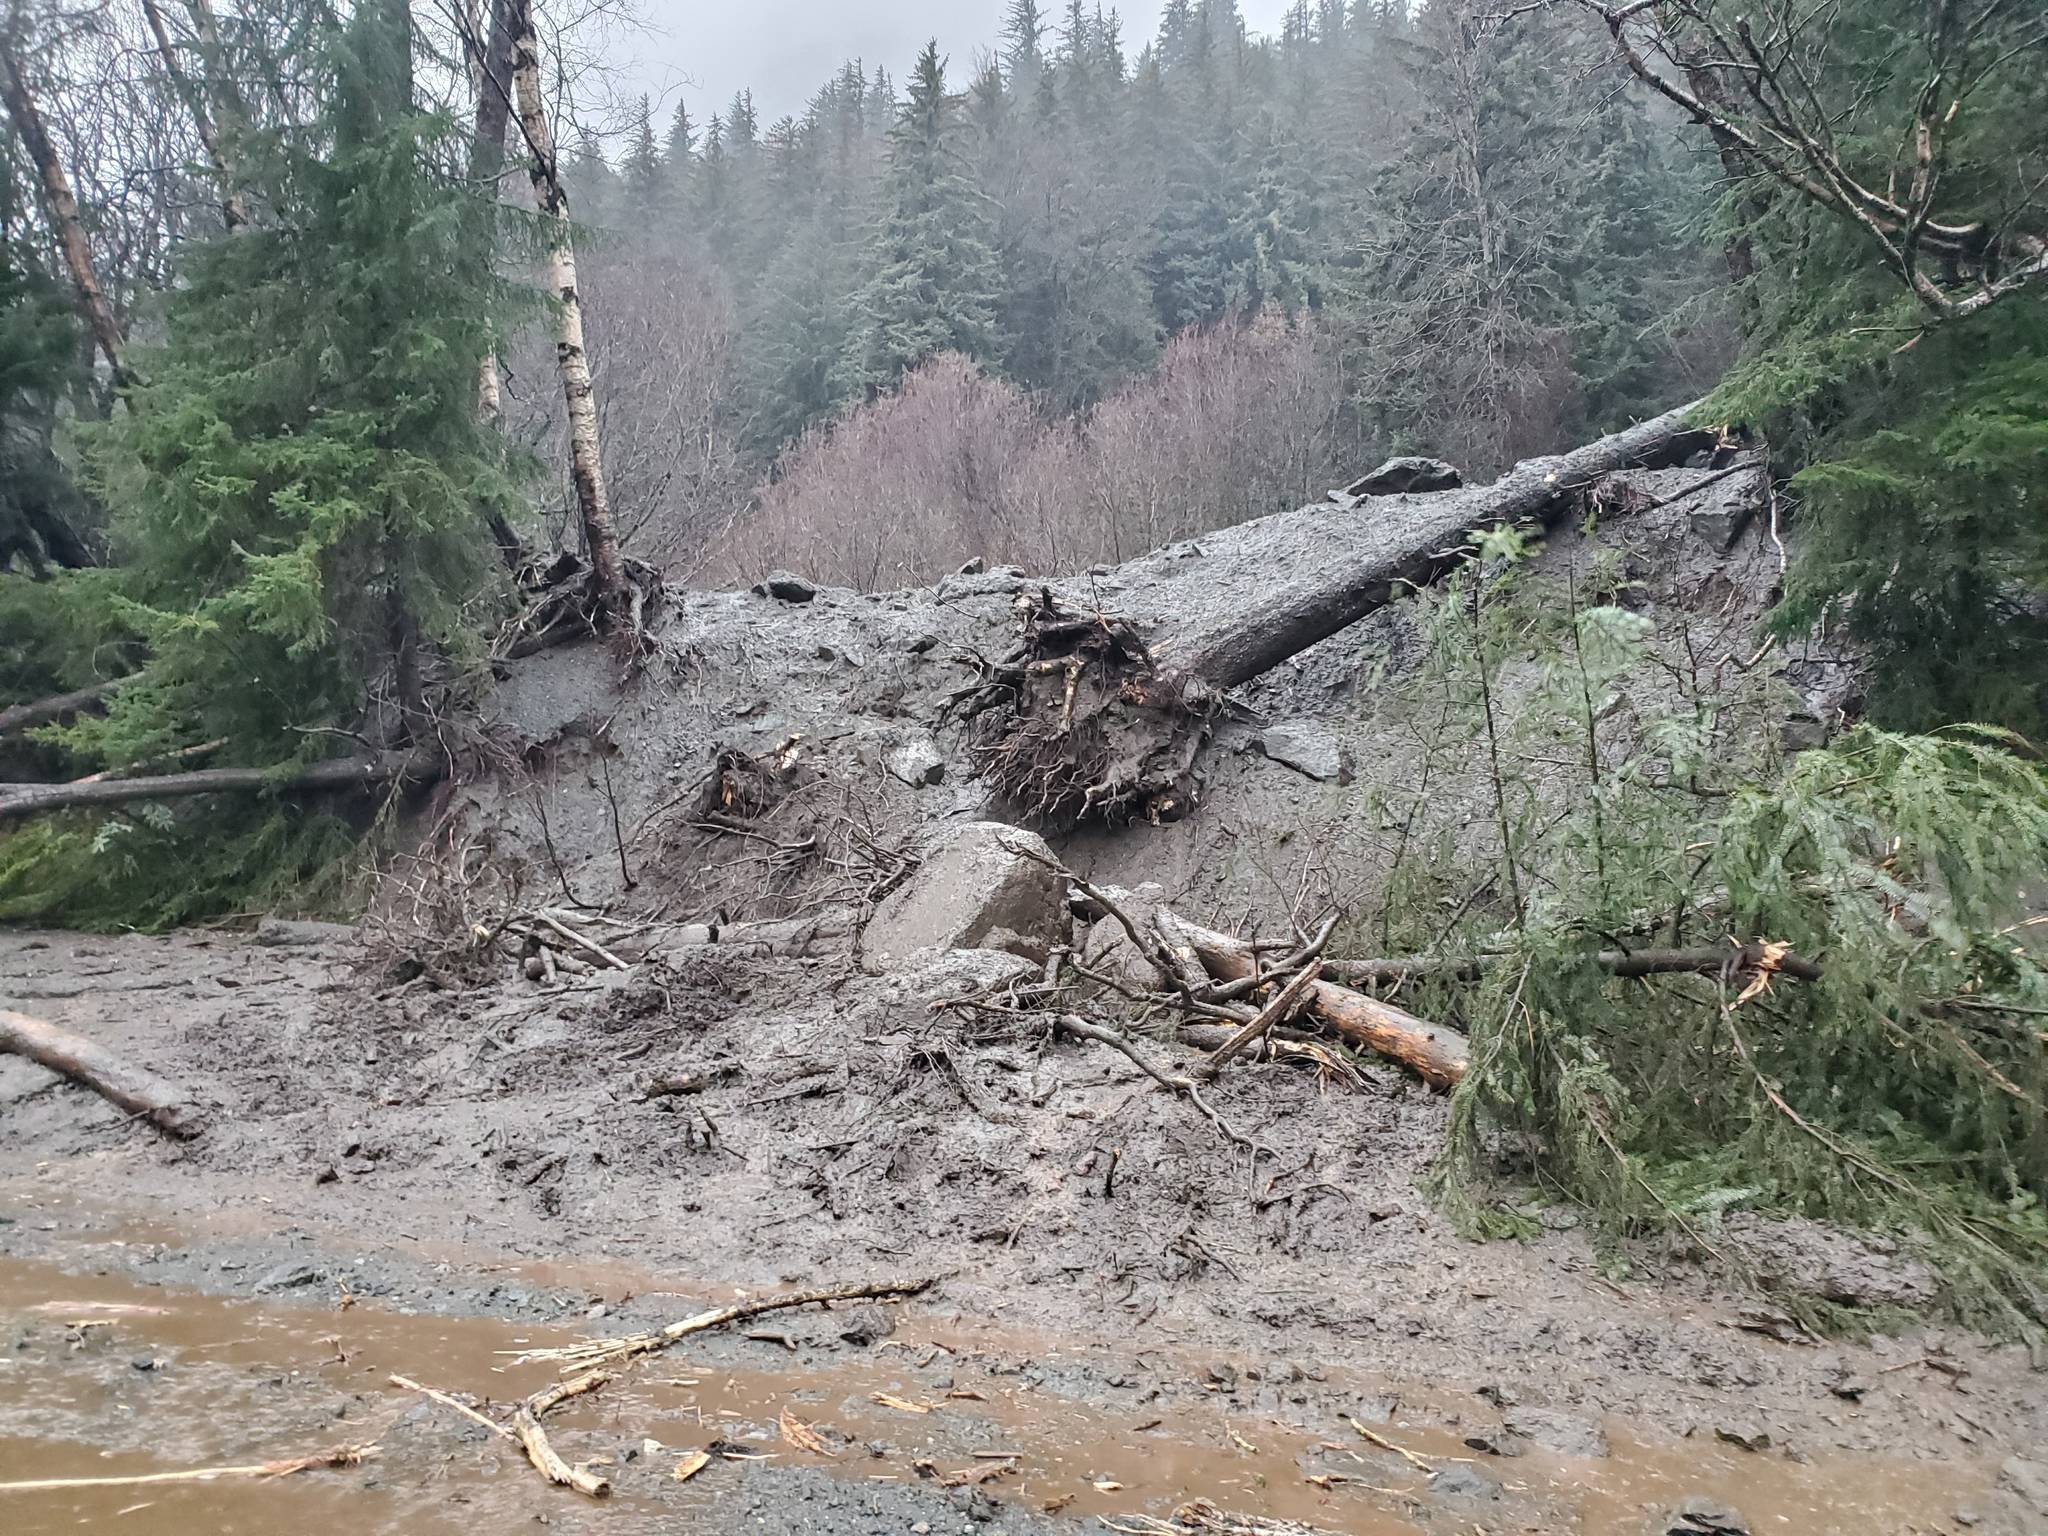 This photo provided by the Alaska Department of Transportation and Public Facilities shows damage from heavy rains and a mudslide 600 feet wide in Haines, Alaska, on Wednesday, Dec. 2, 2020. Authorities say six people are unaccounted for, and four homes were destroyed in the slide, with the search resuming Thursday morning for survivors. (Matt Boron/Alaska Department of Transportation and Public Facilities)